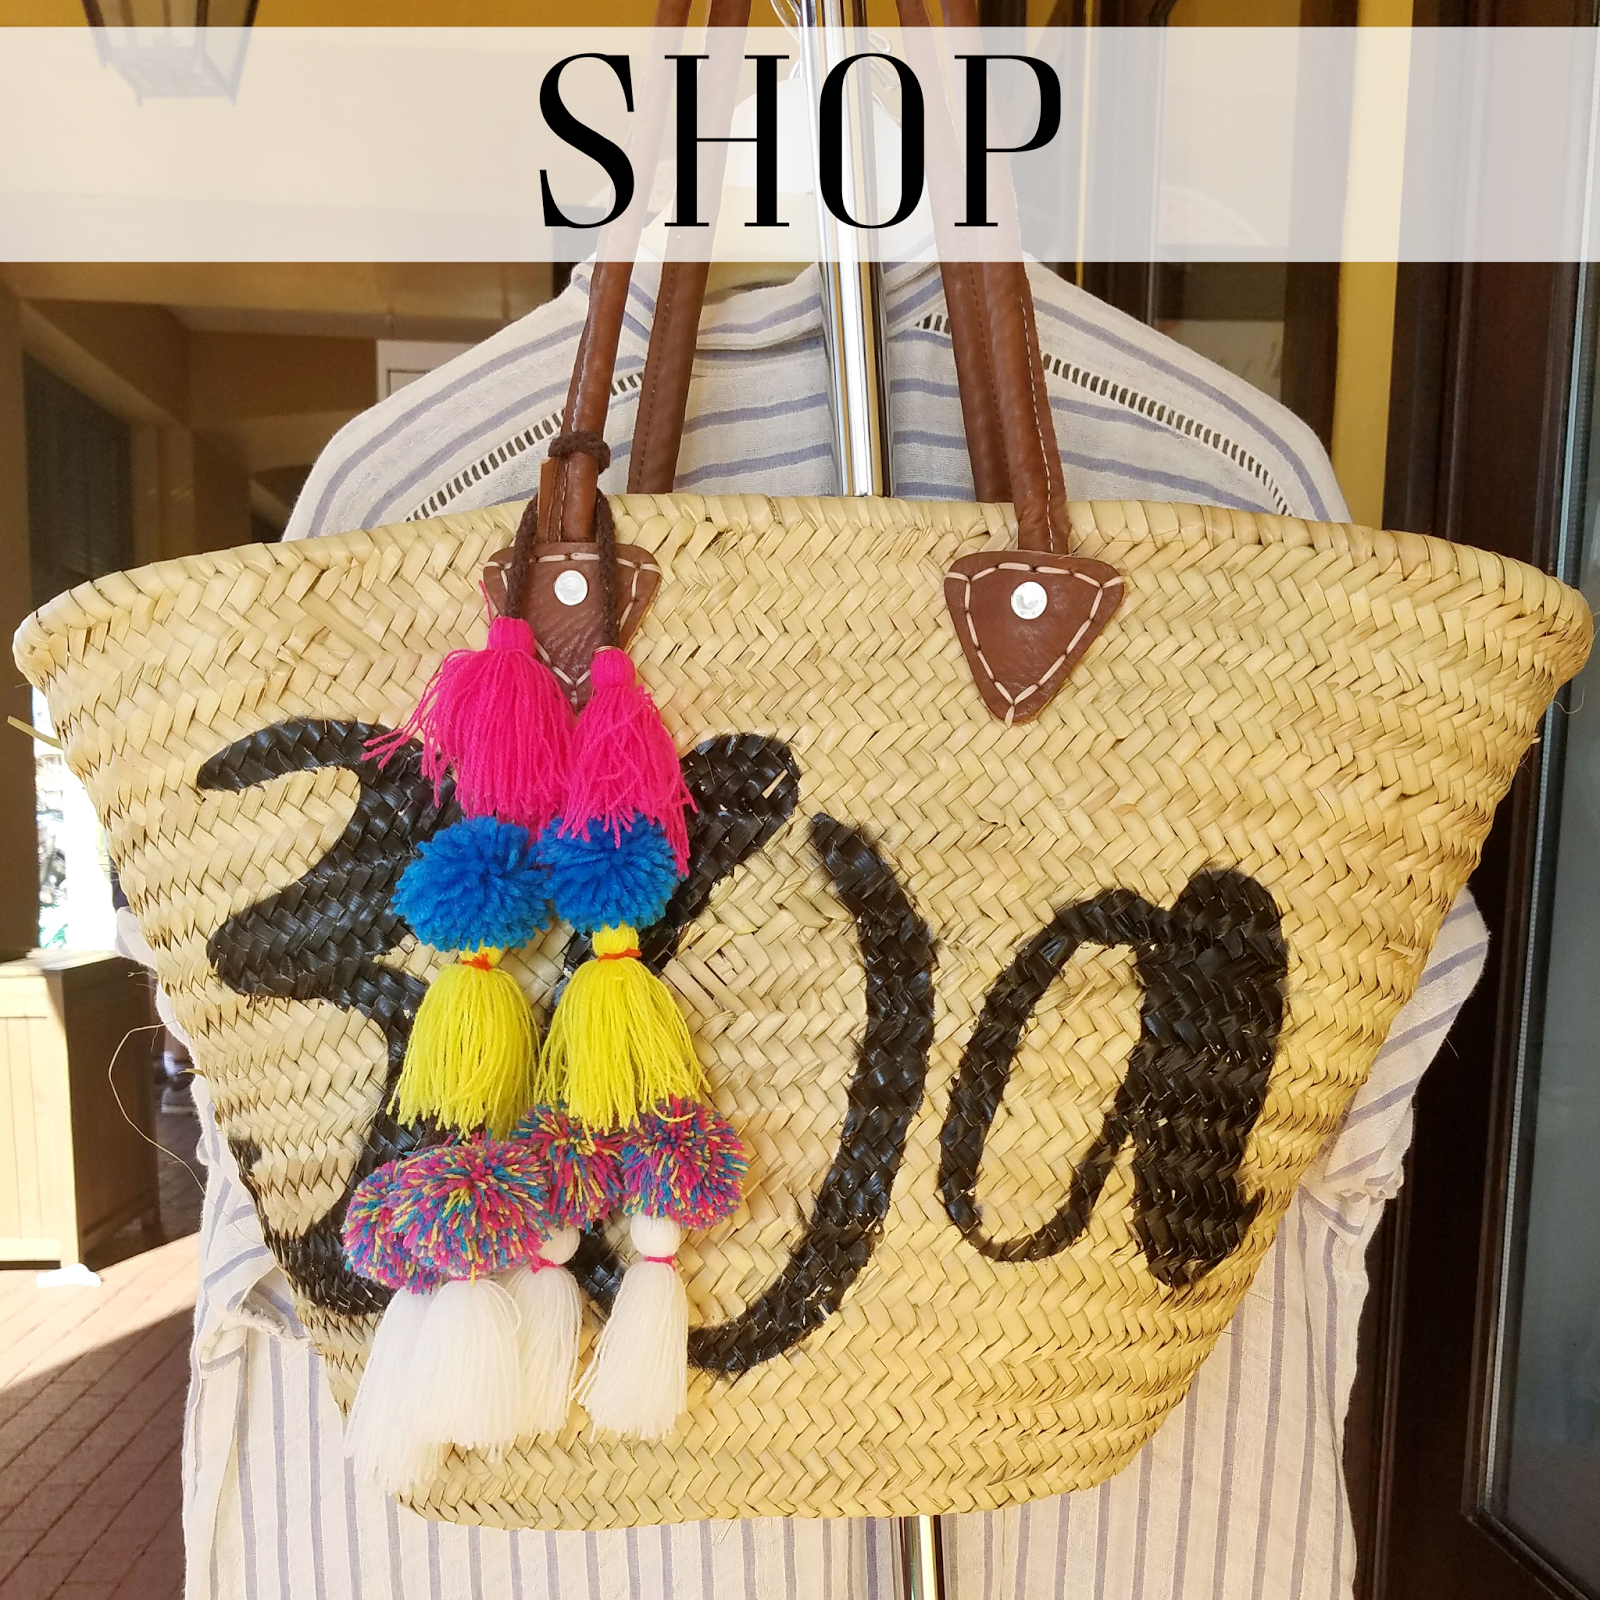 where to shop in 30a